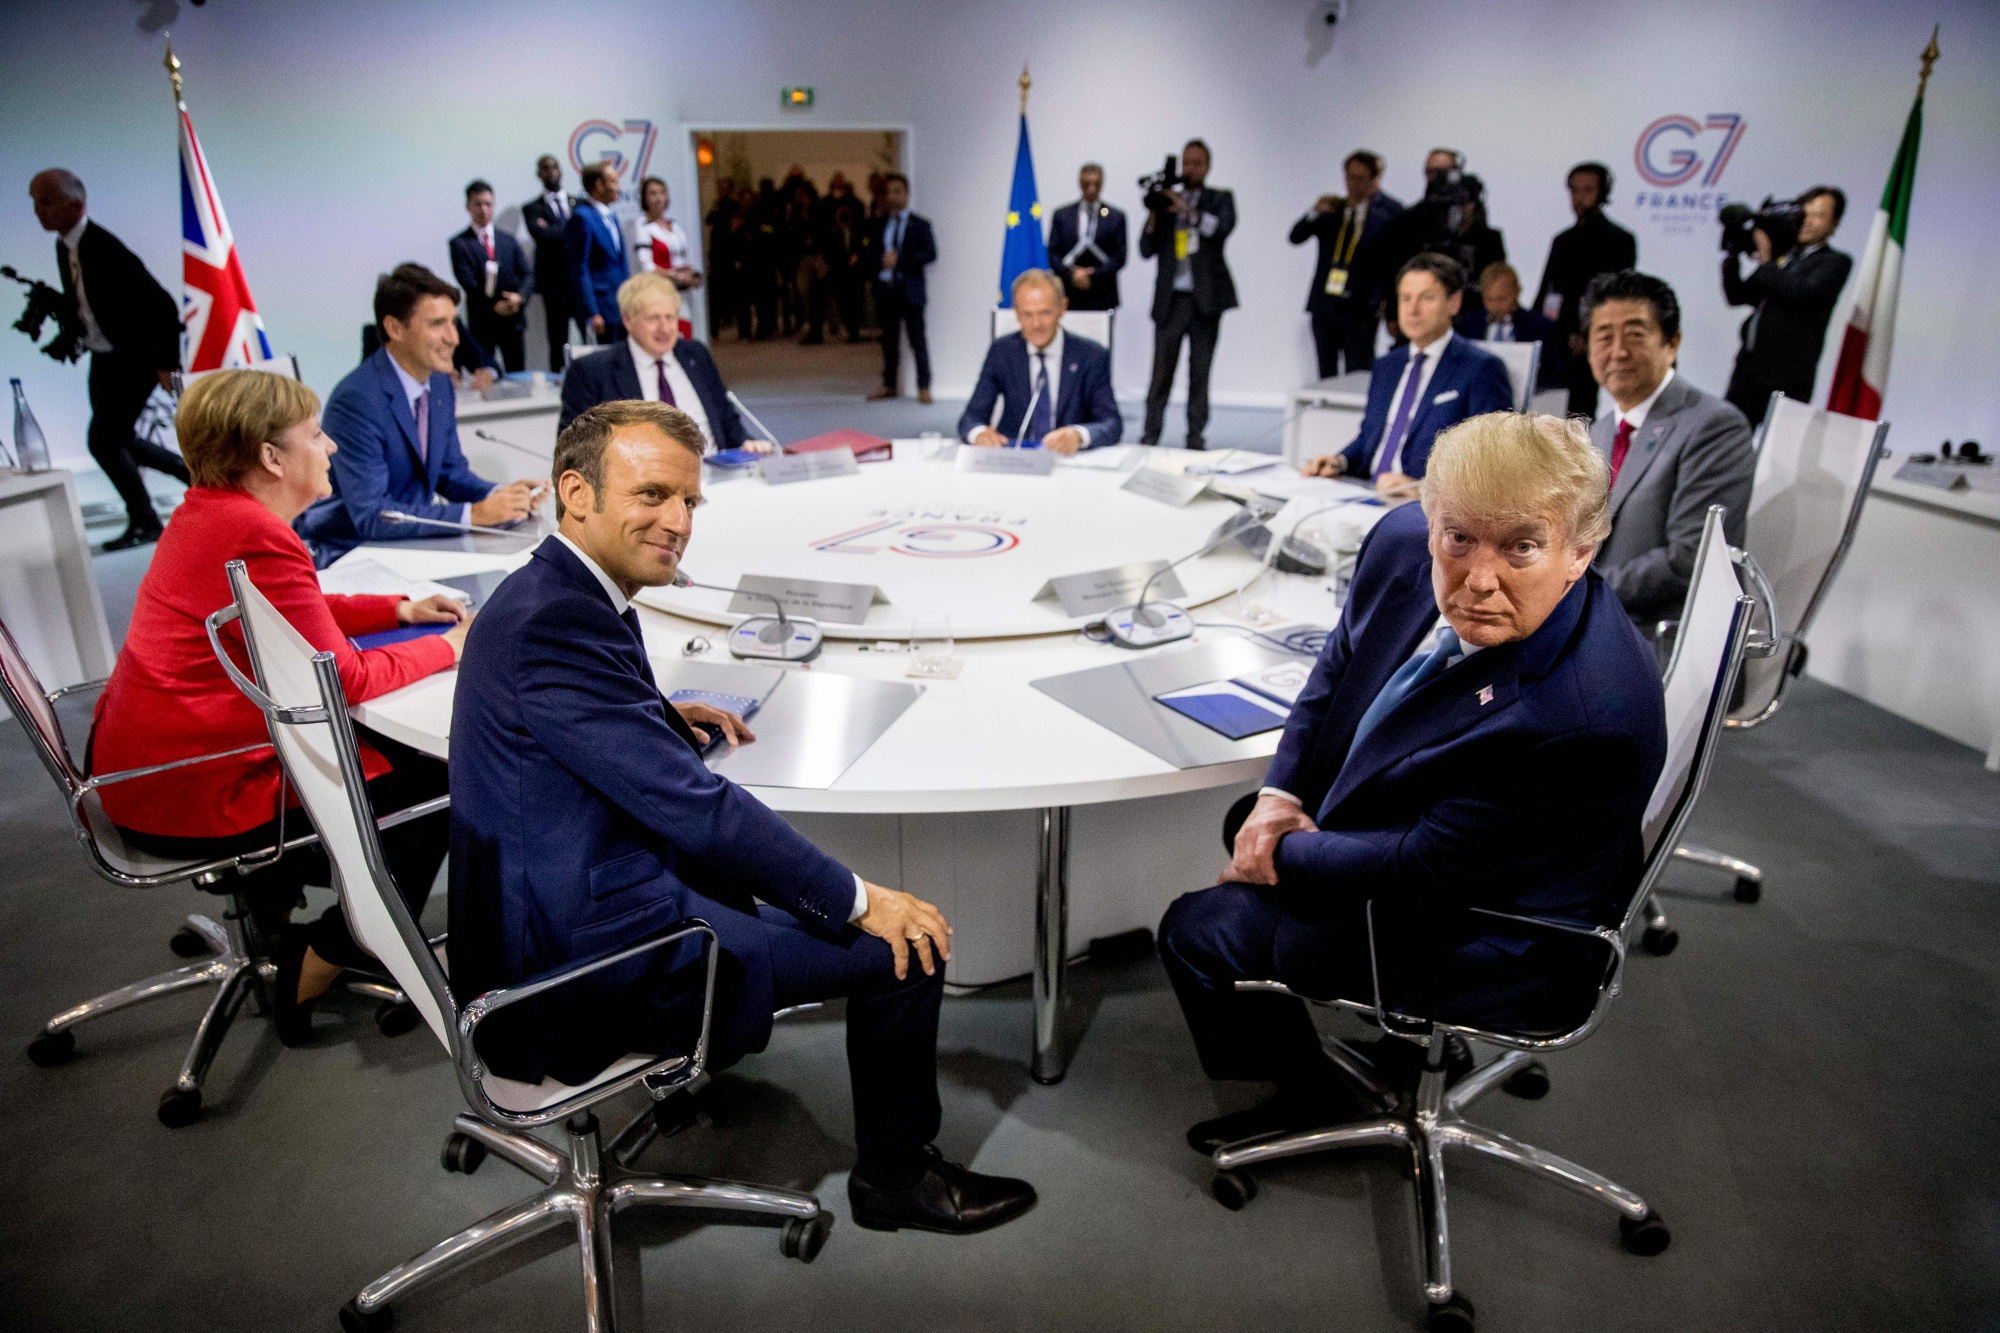 Emmanuel Macron , Donald Trump and other G7 leaders during the G7 summit&nbsp;in 2019.